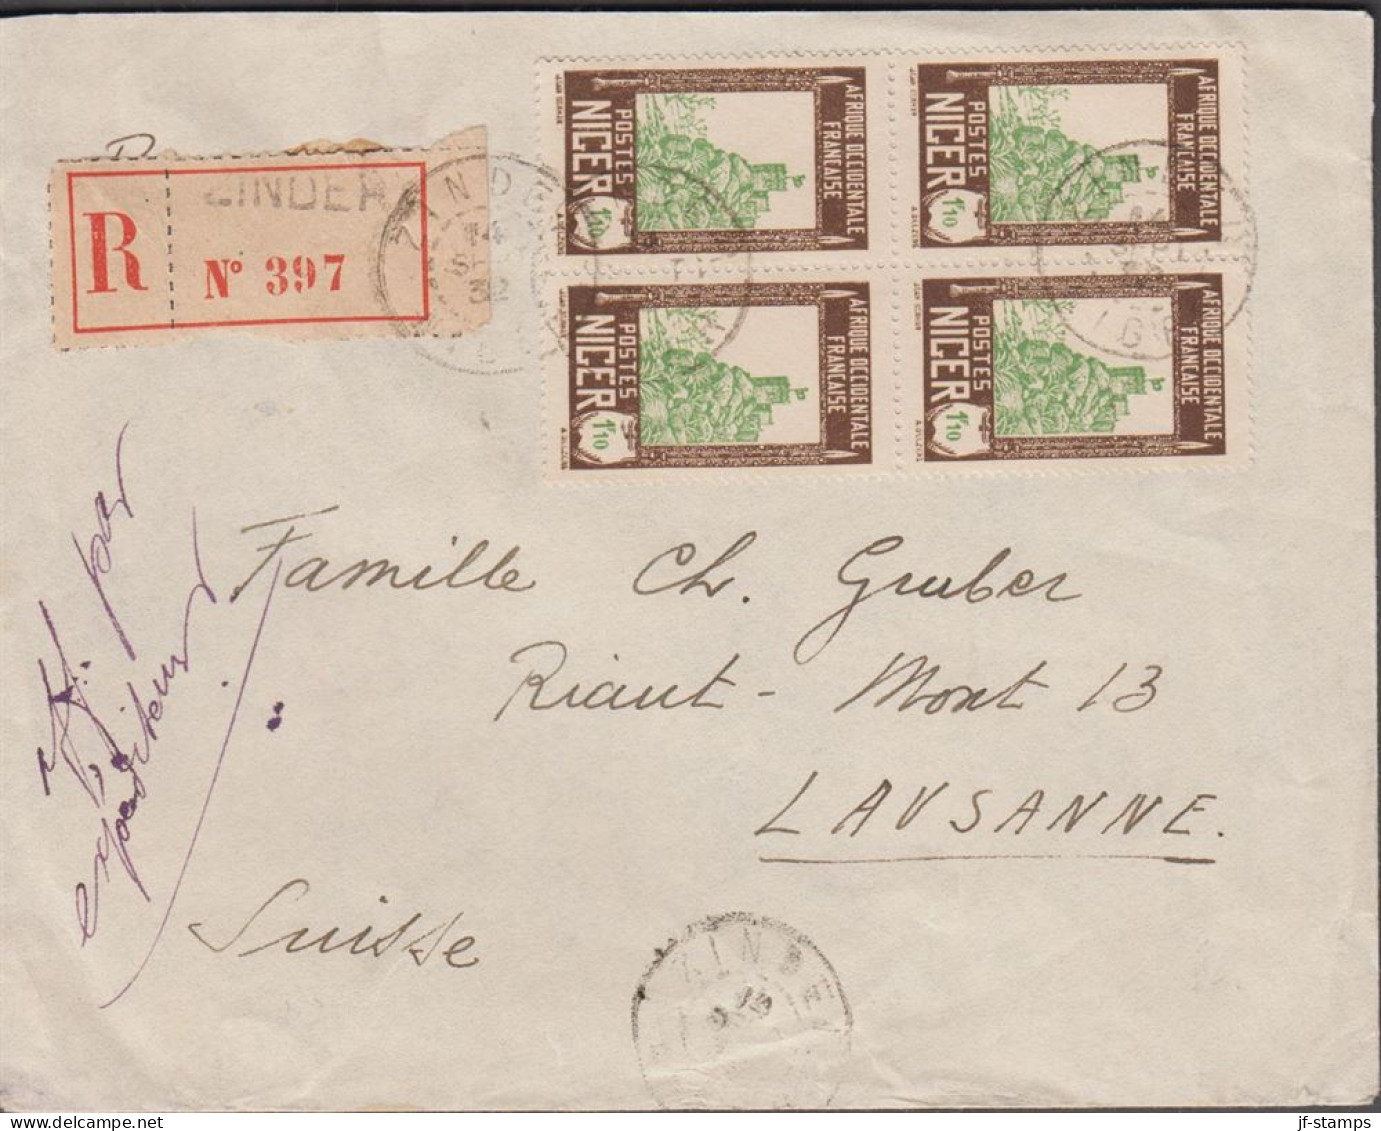 1932. NIGER. Fine Registered Cover To Lausanne, Suisse With 4block 1F10 Fort Zinder Cancelled ... (MICHEL 47) - JF545401 - Oblitérés